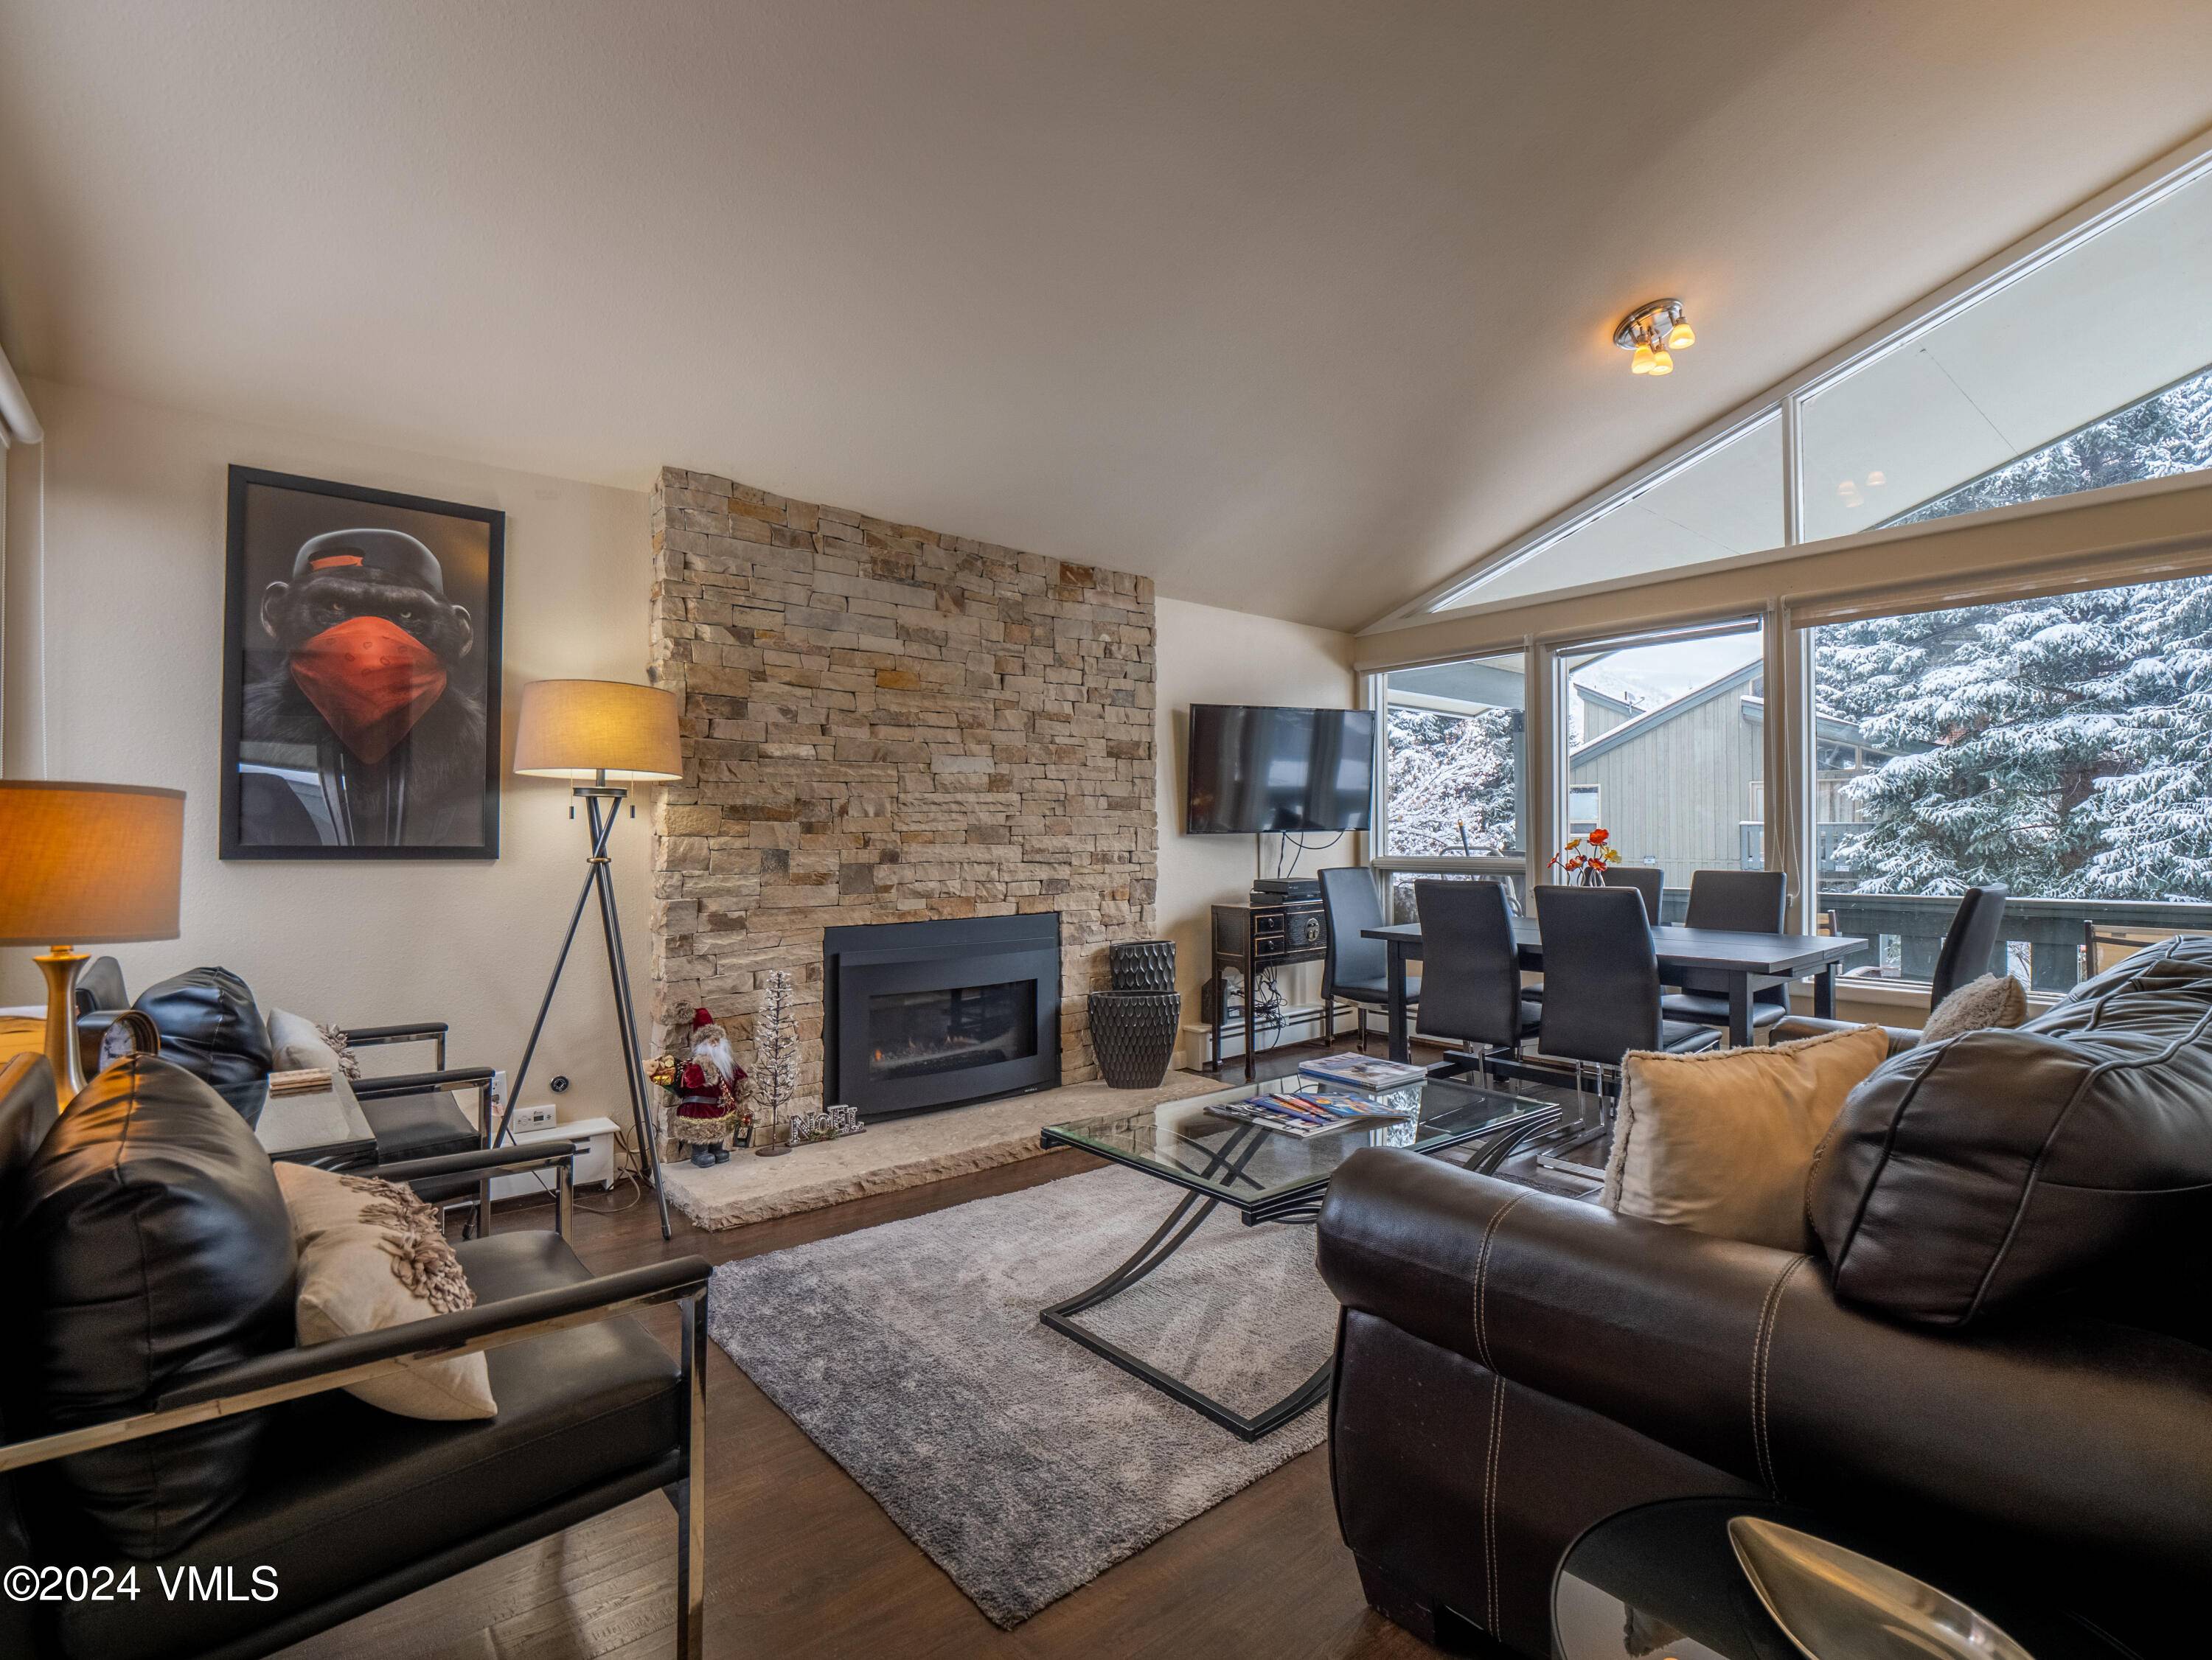 Meticulously designed, this condo offers a blend of comfort and elegance just minutes from the ski slopes.